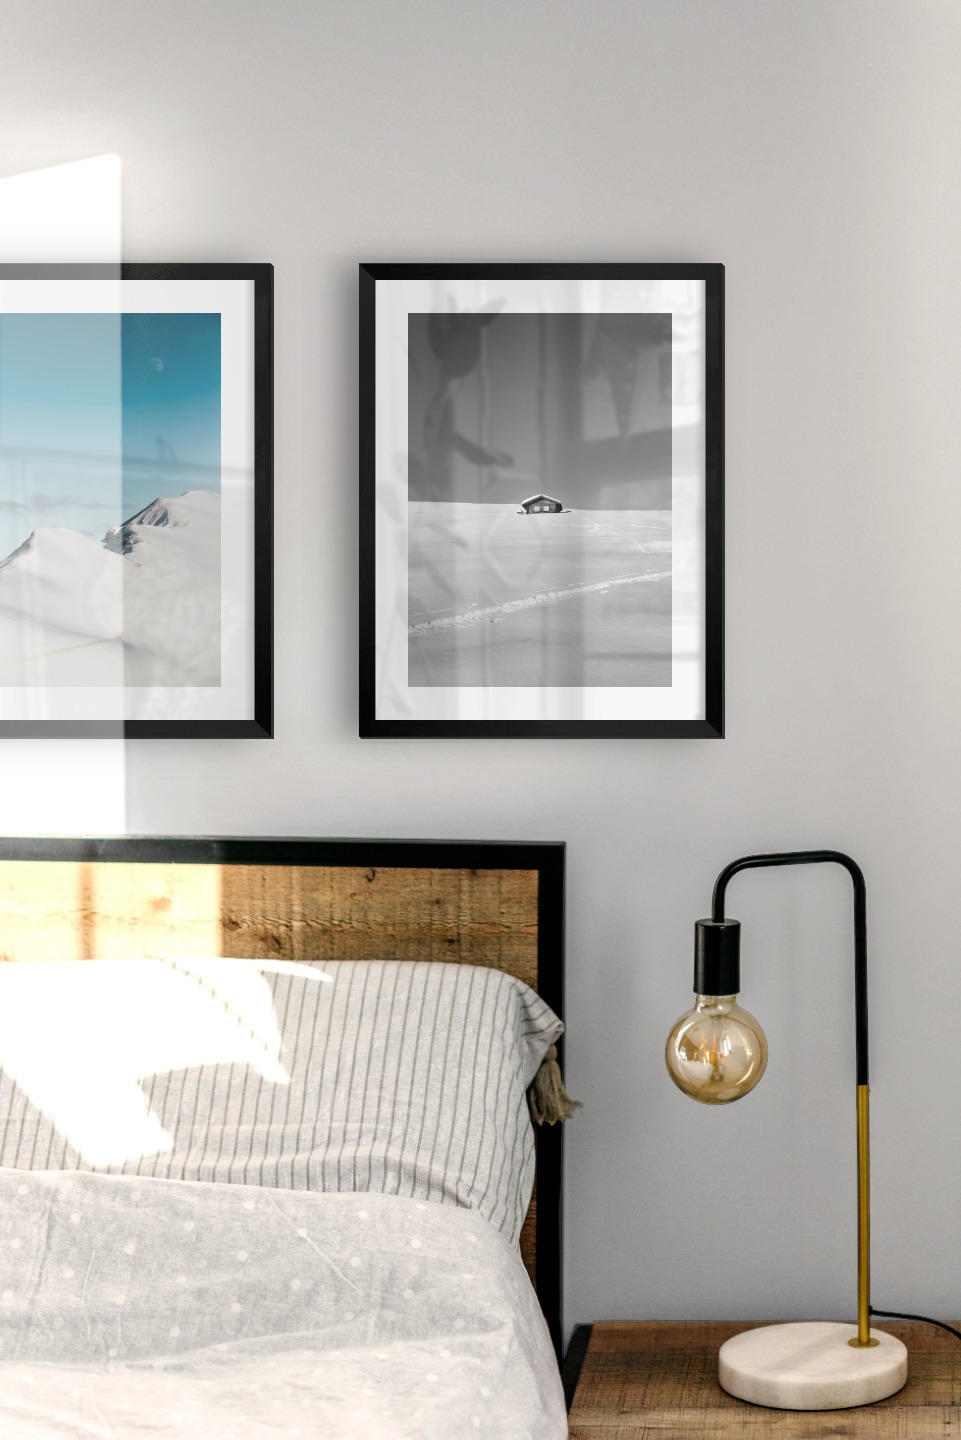 Gallery wall with picture frames in black in sizes 30x40 with prints "Snowy mountain peaks" and "Cottage in the snow"